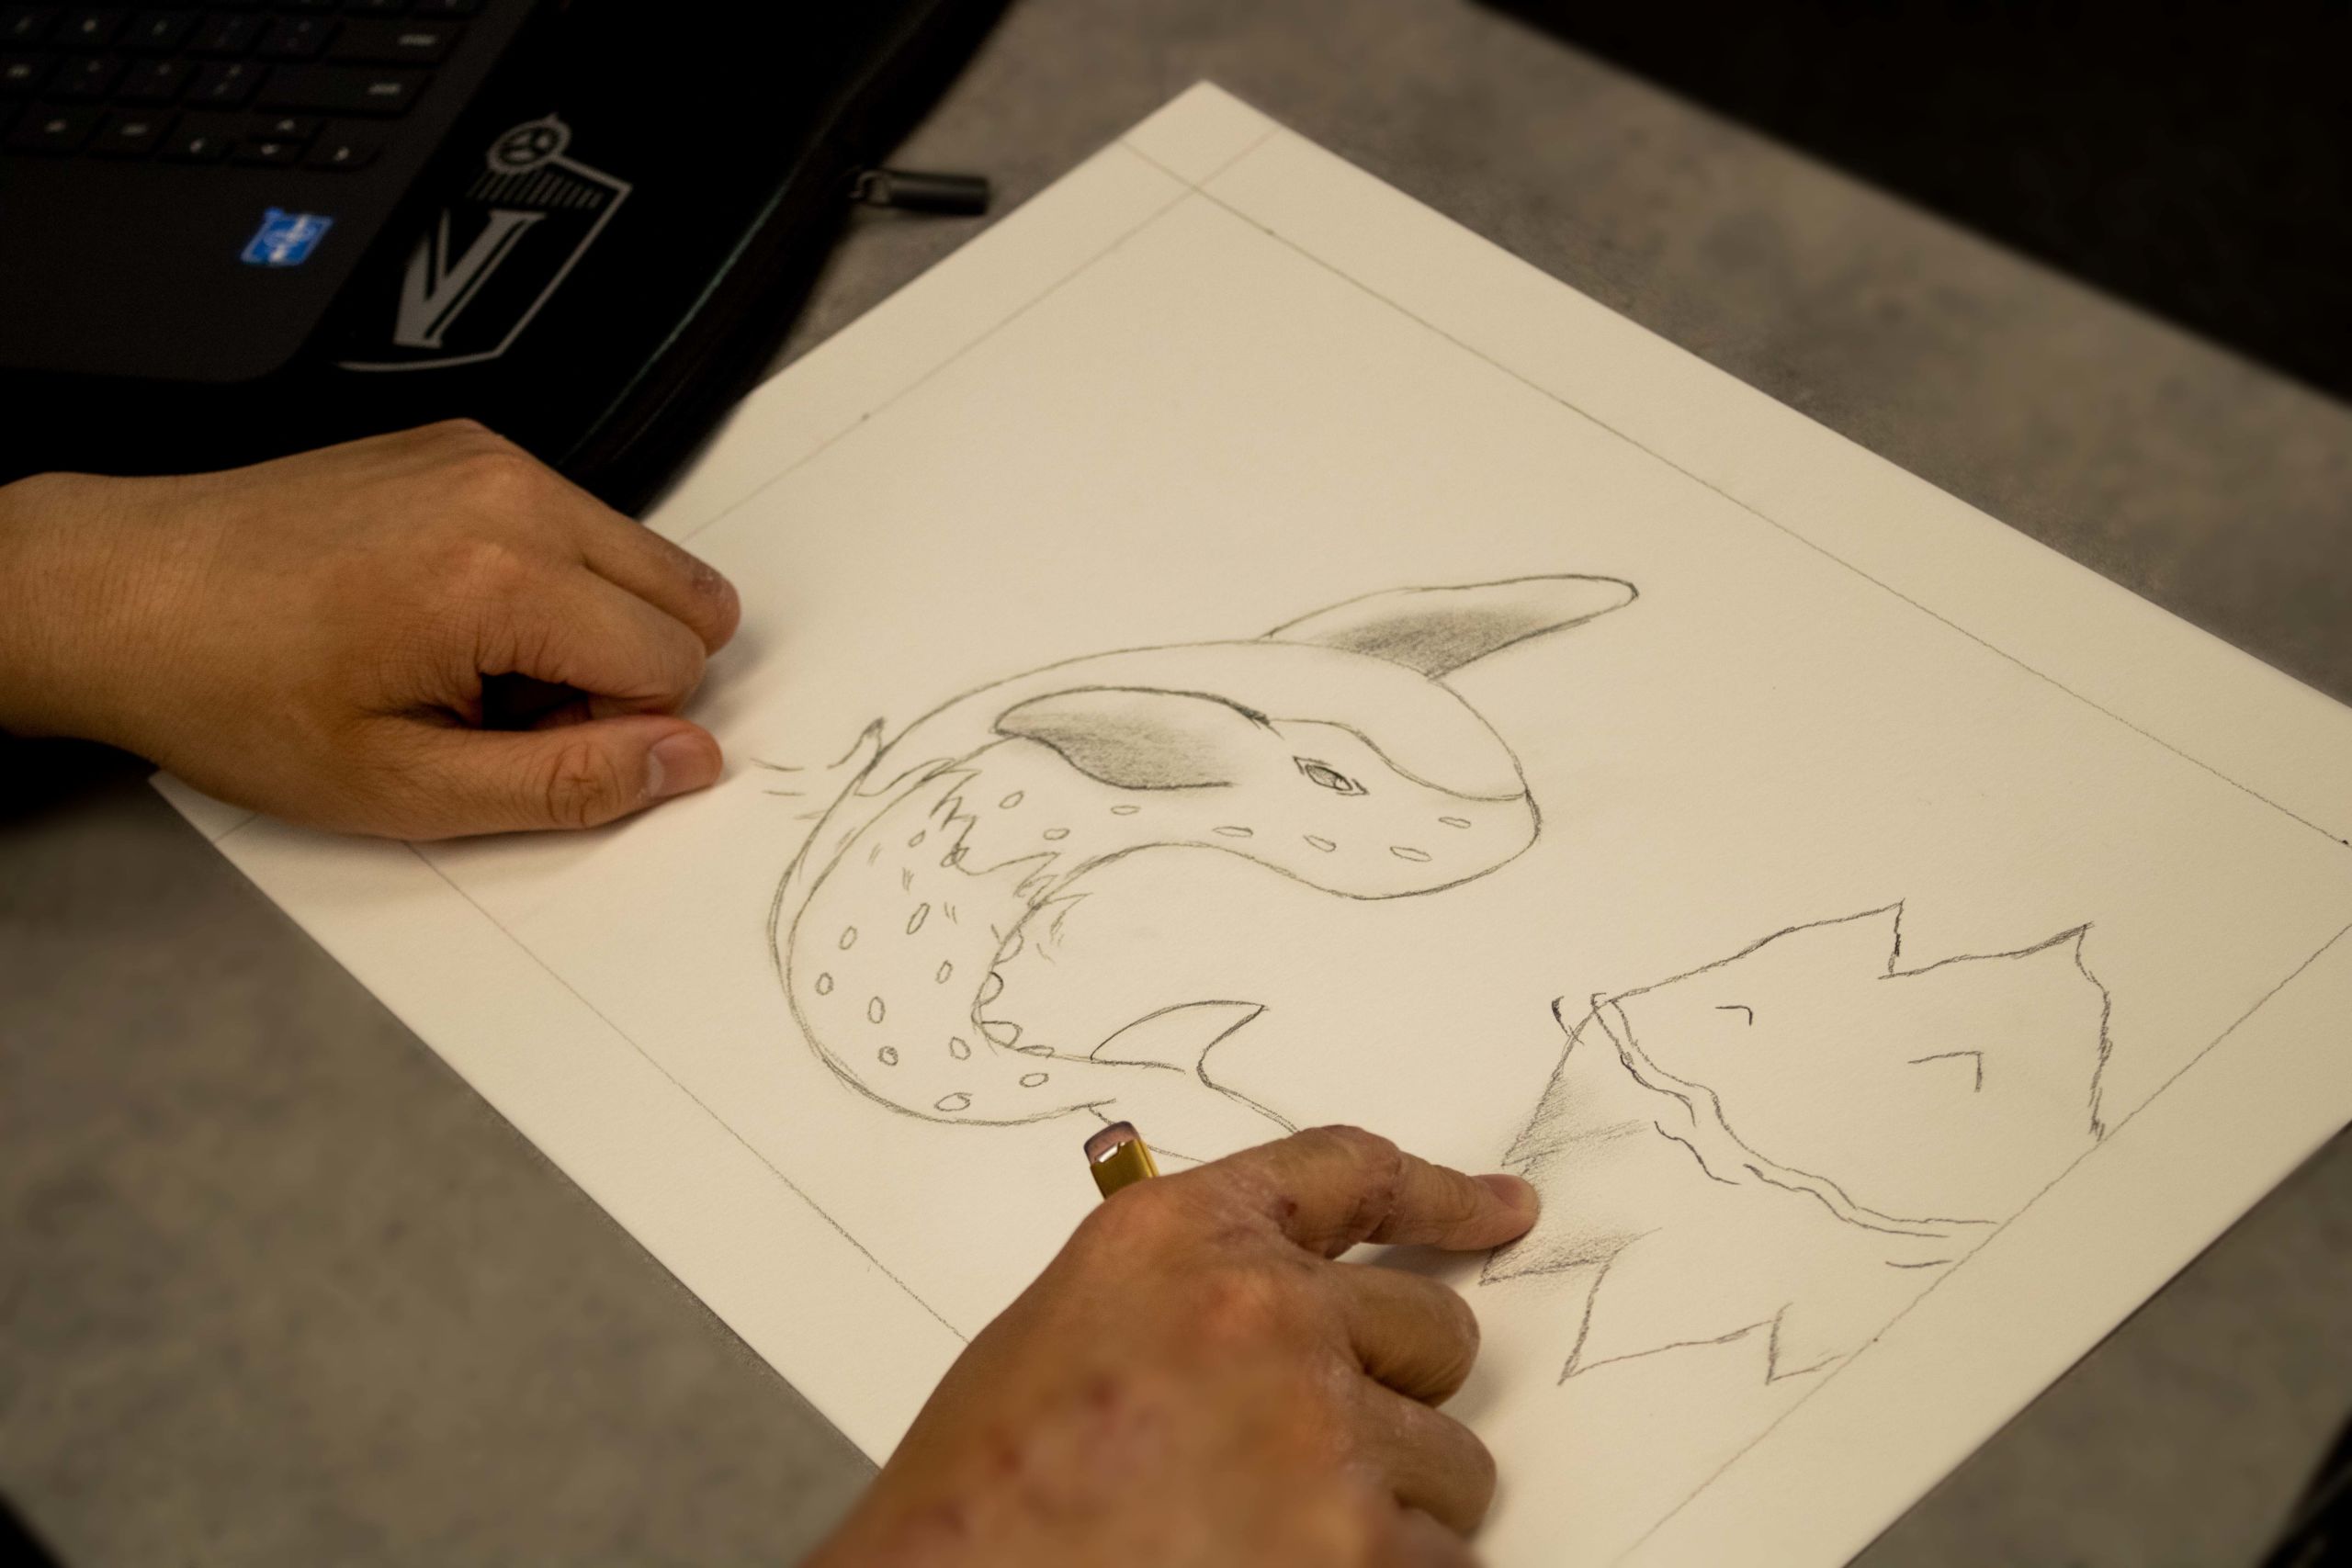 Colin draws one of his favorite subjects -- a sea creature -- during his Advanced Drawing & Design class at Muchin.